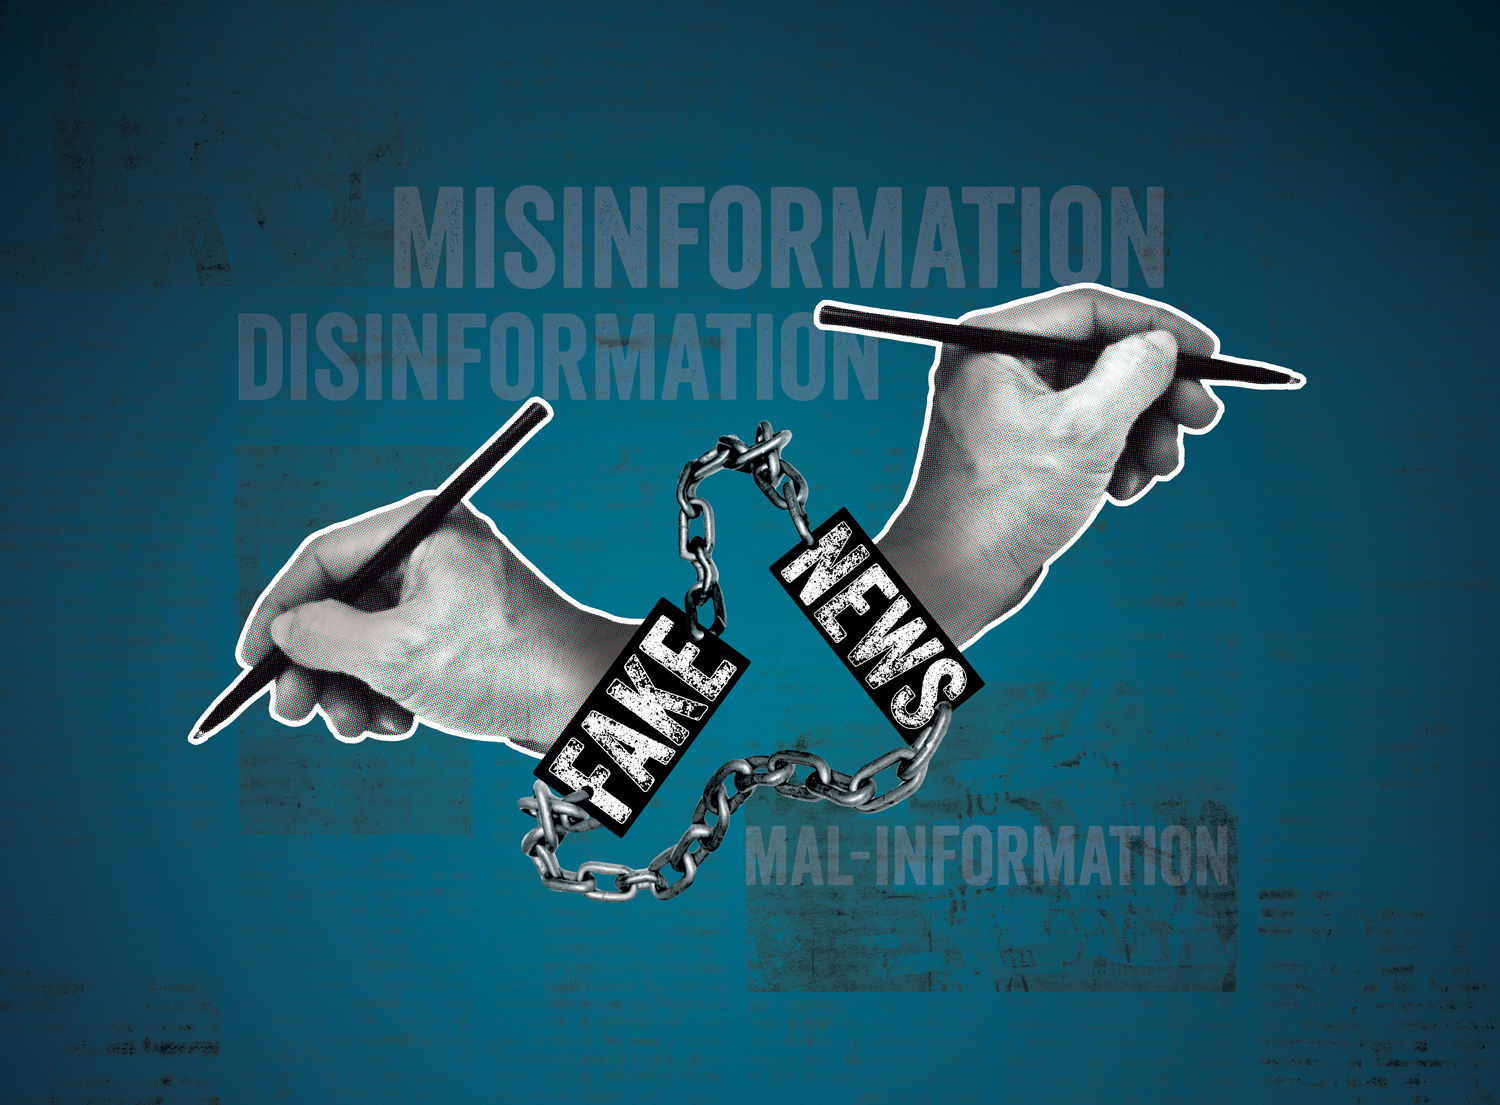 Six Individuals Face Legal Action for Spreading Misinformation